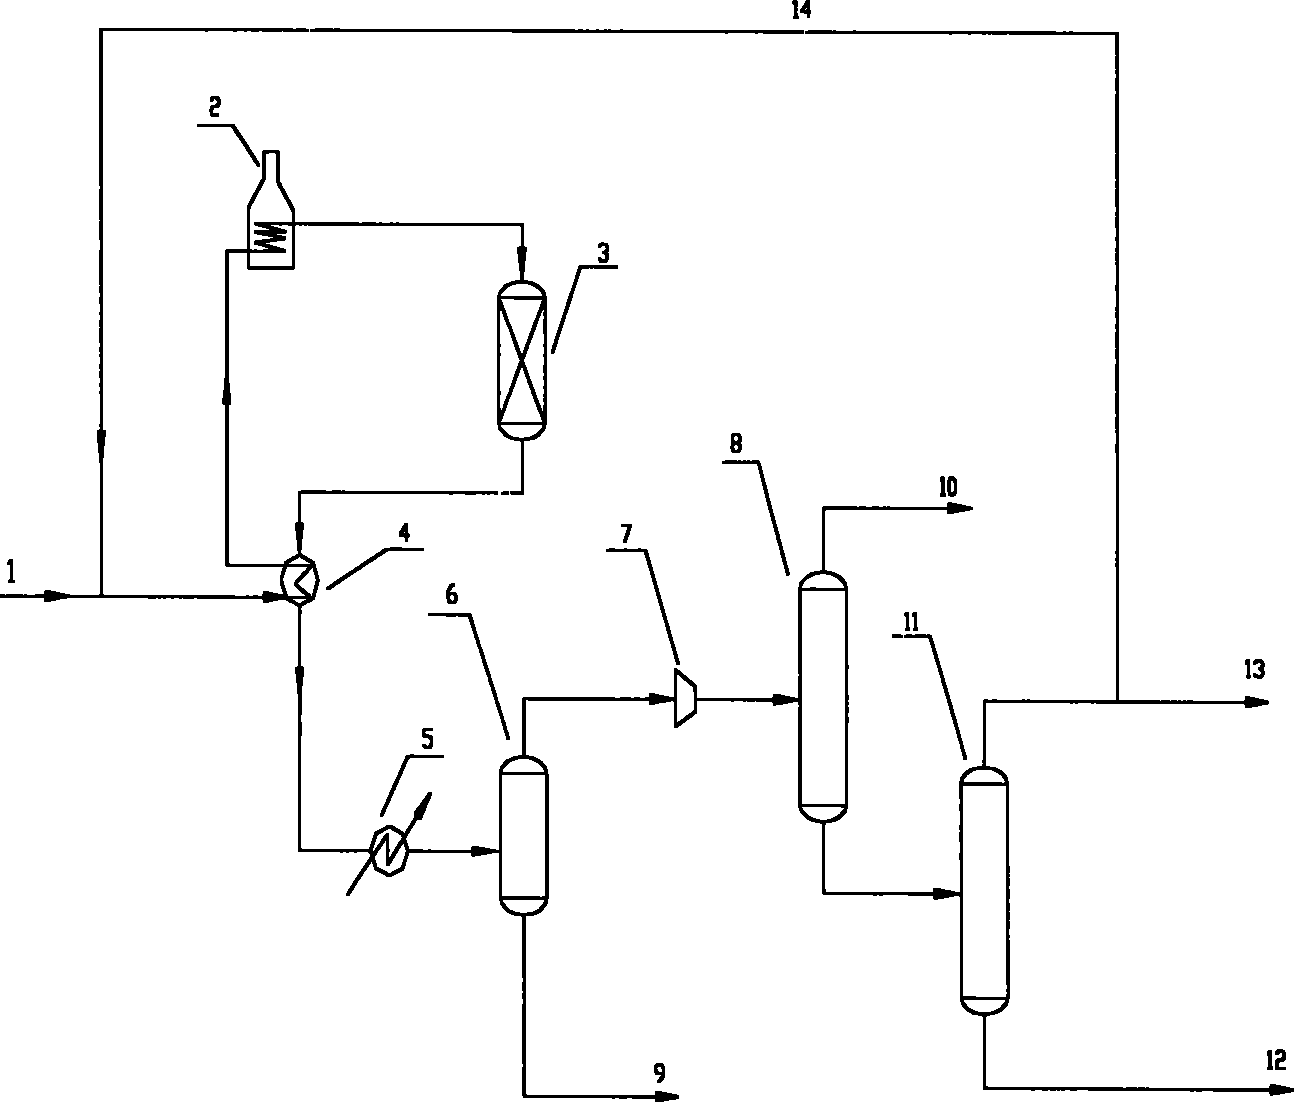 Method for preparing olefin in lightweight by catalytic cracking olefin of containing carbon